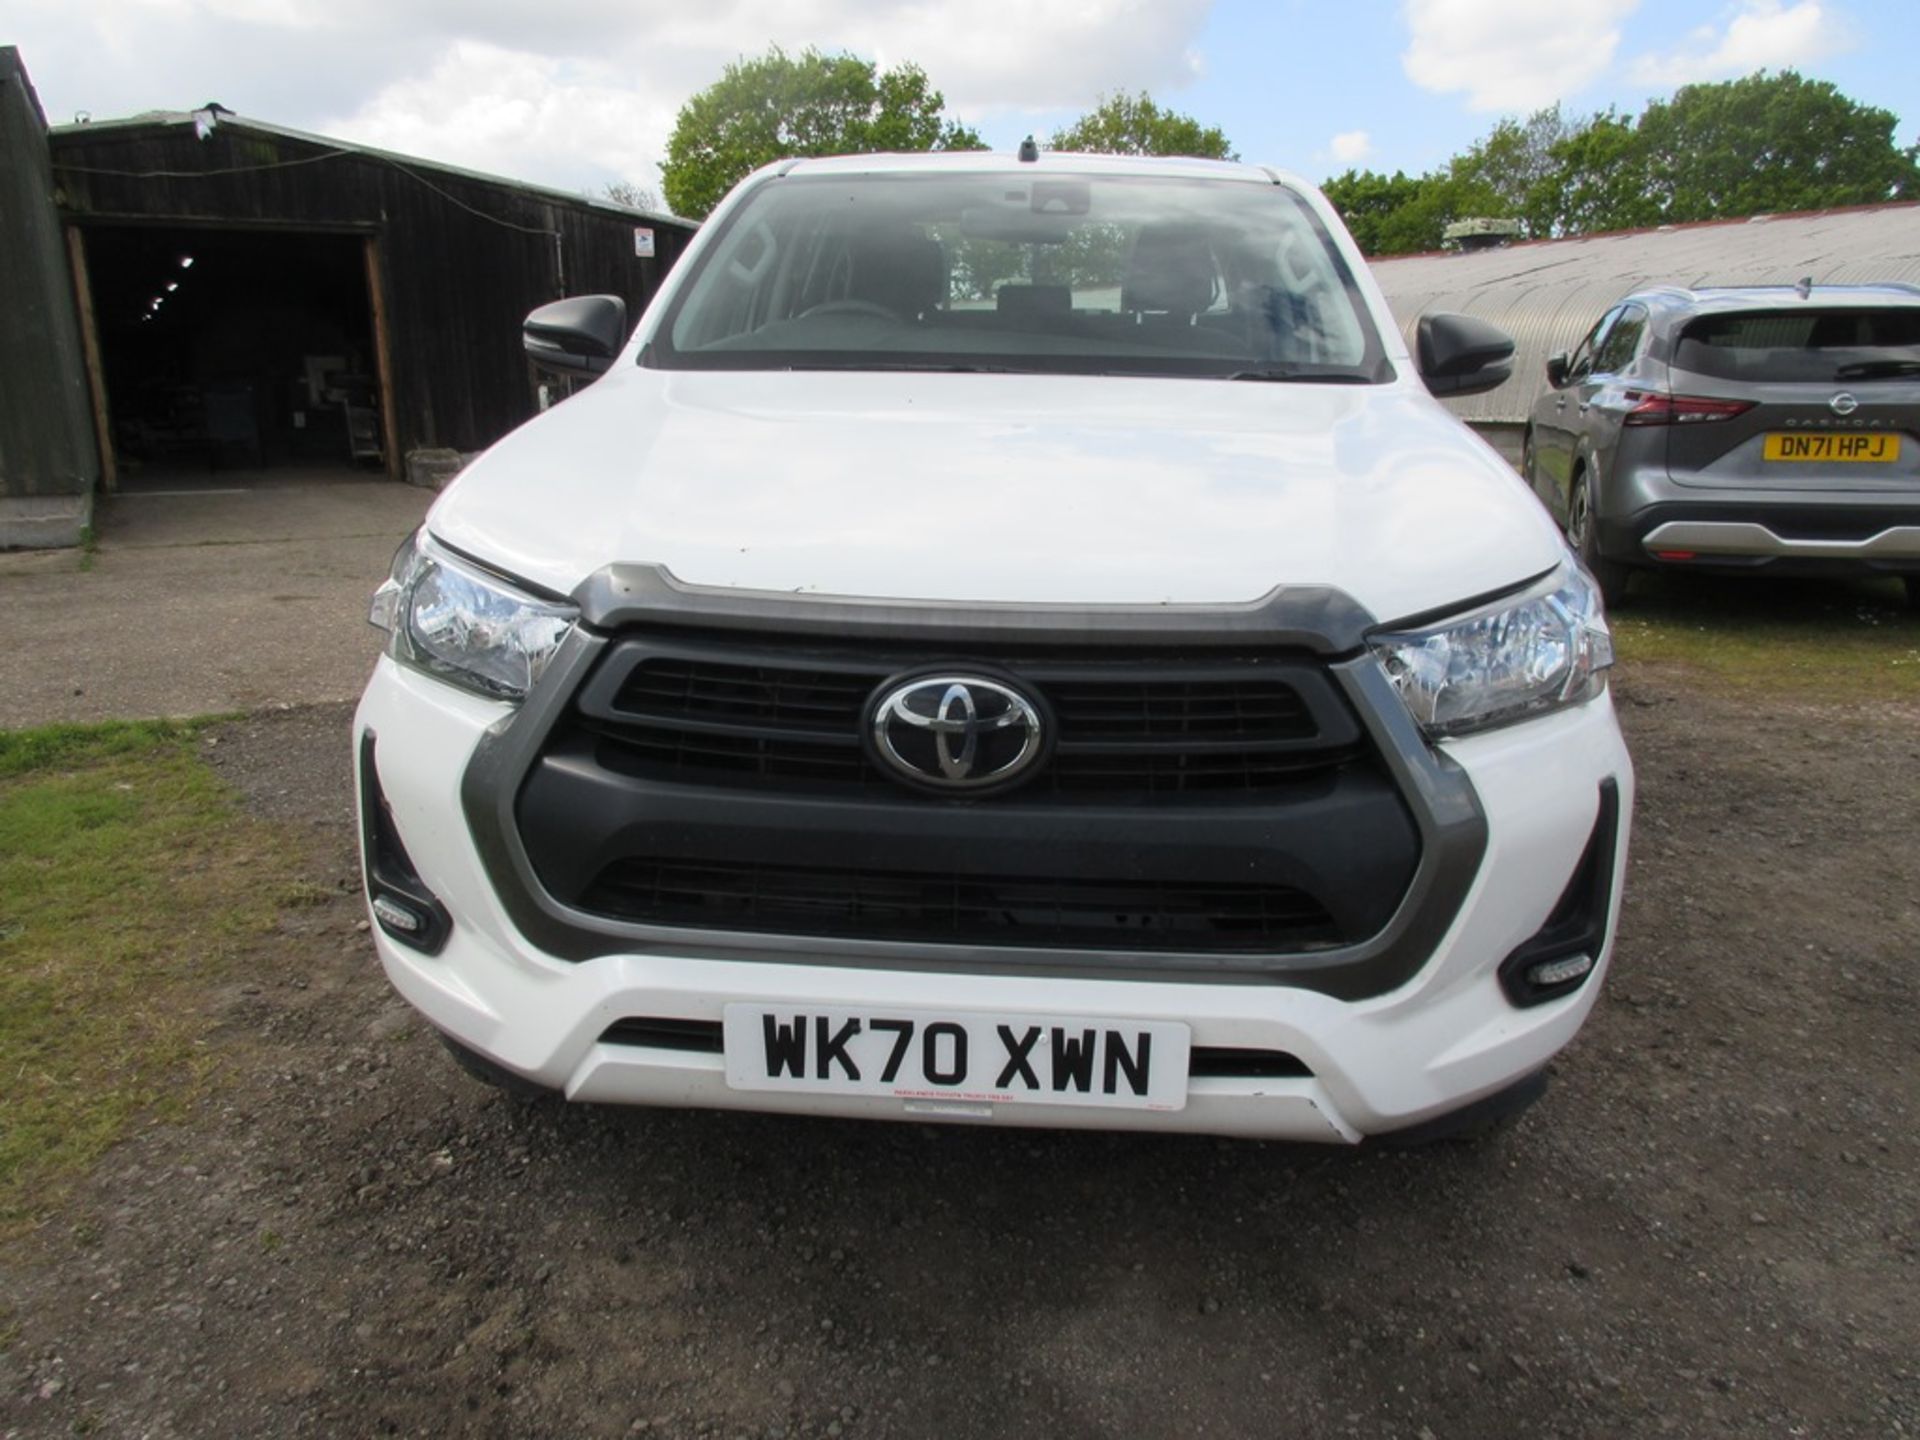 Toyota Hilux Active 2.4D-4D 4Wd Double Cab pickup, 147bhp (19/01/2021) - Image 3 of 18